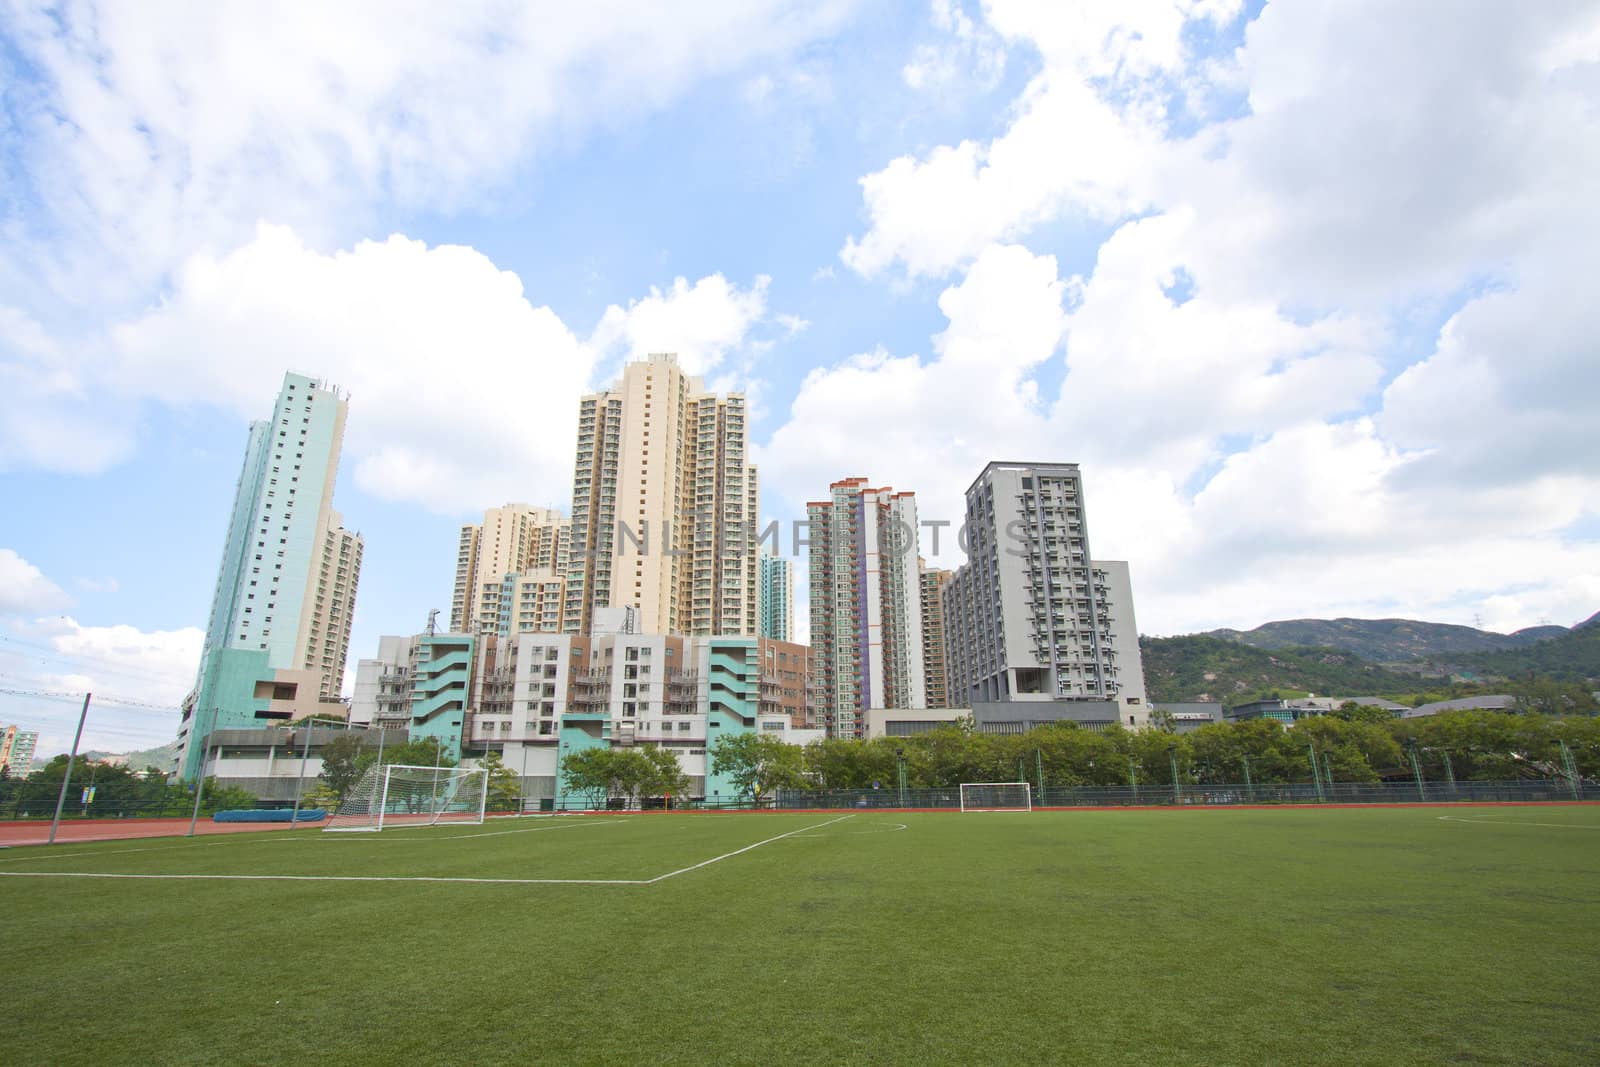 Hong Kong downtown with residential buildings and sports court